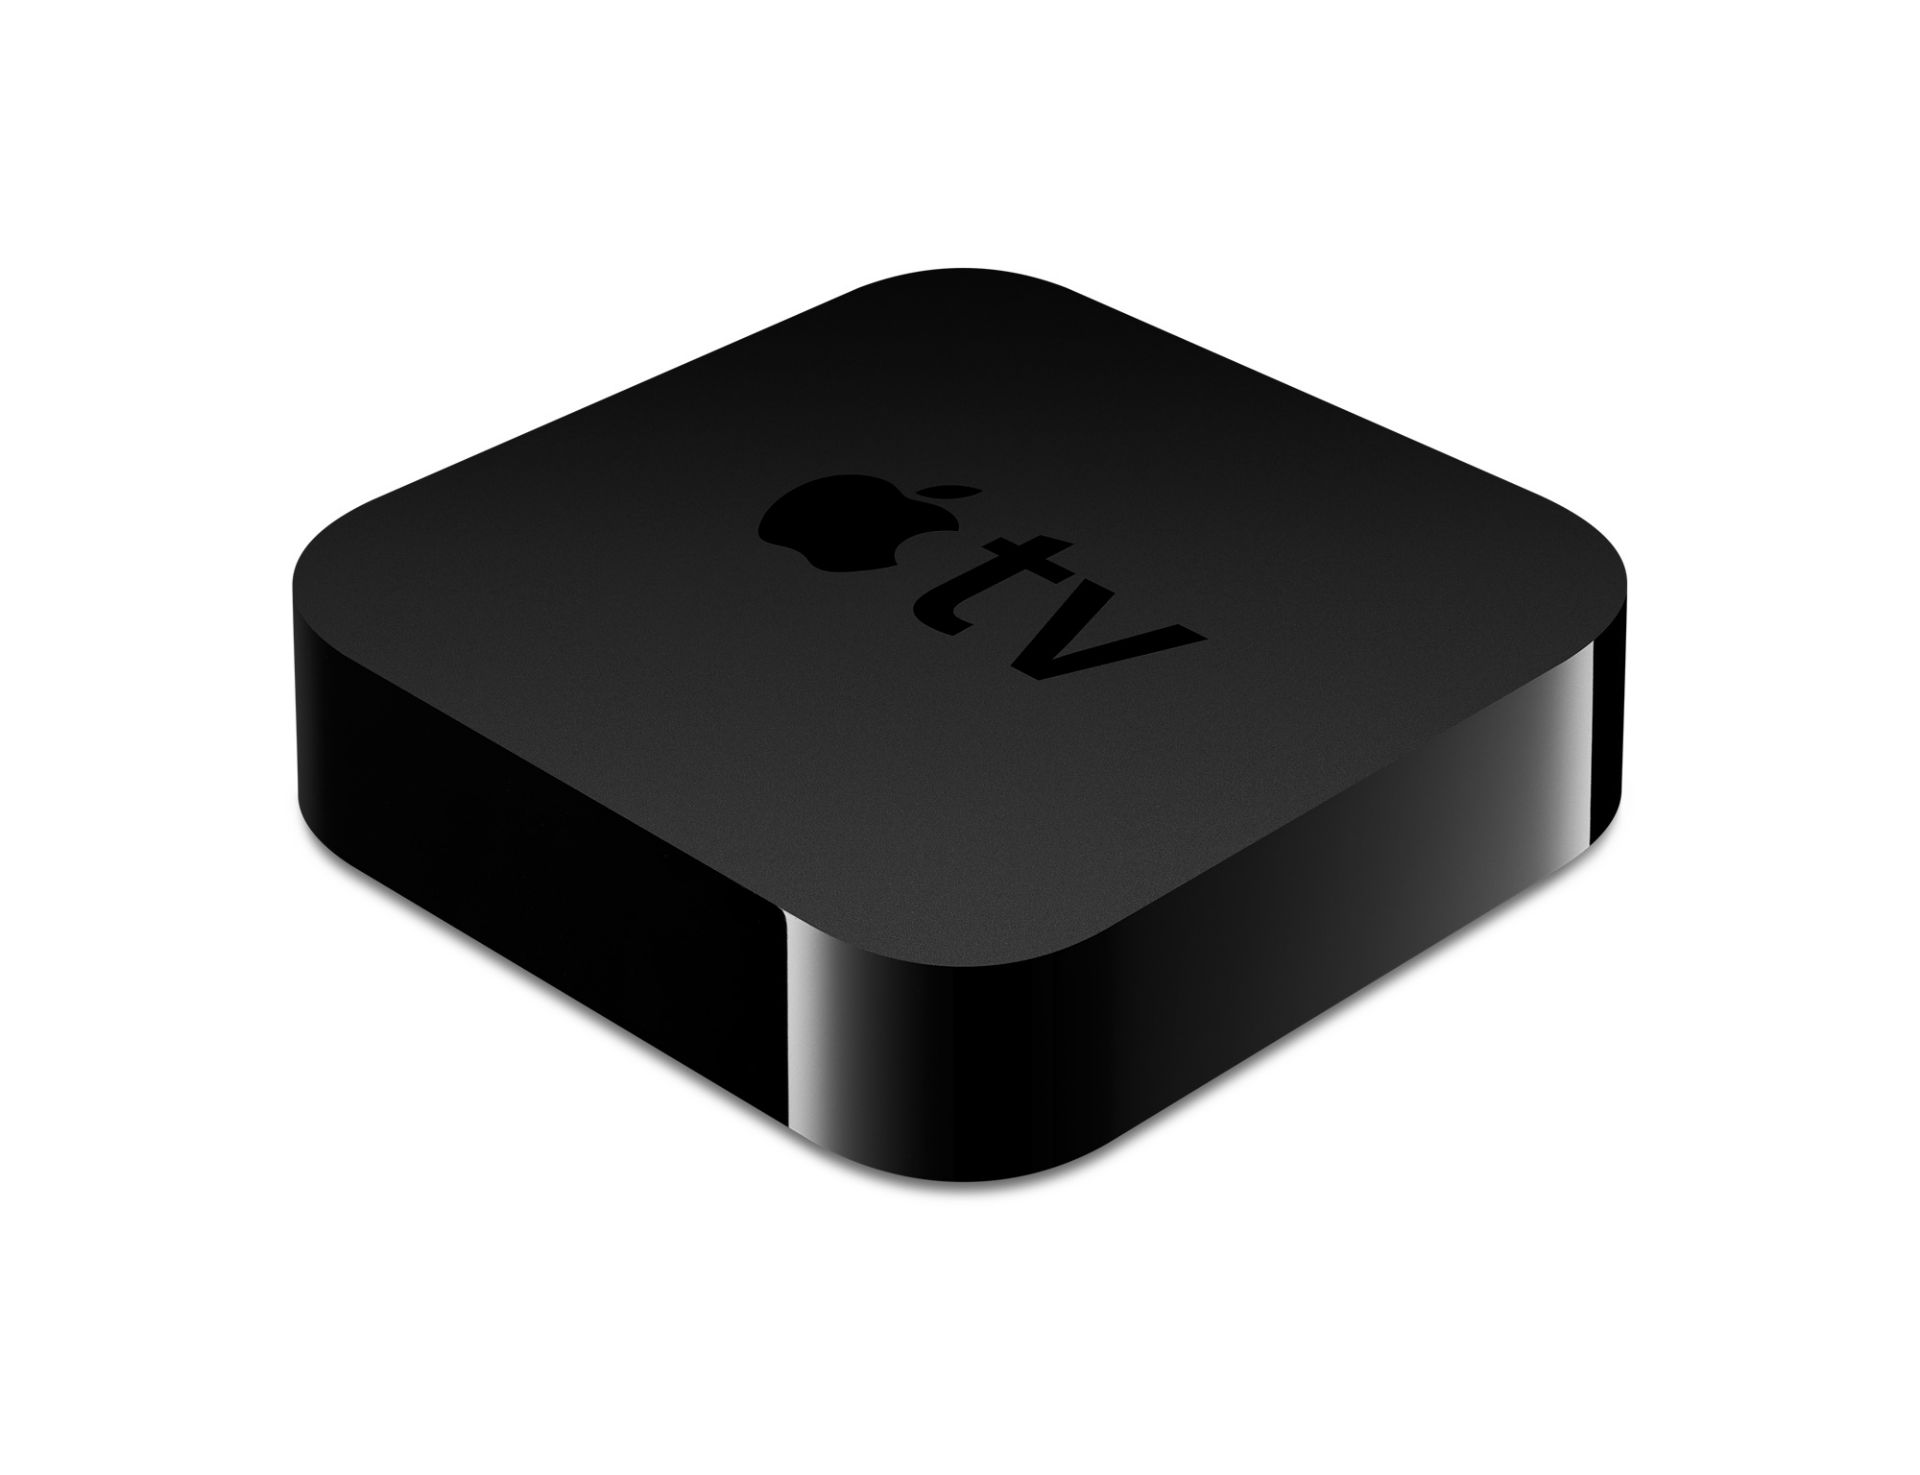 V Grade A Apple TV 3 With HDMI And USB Port